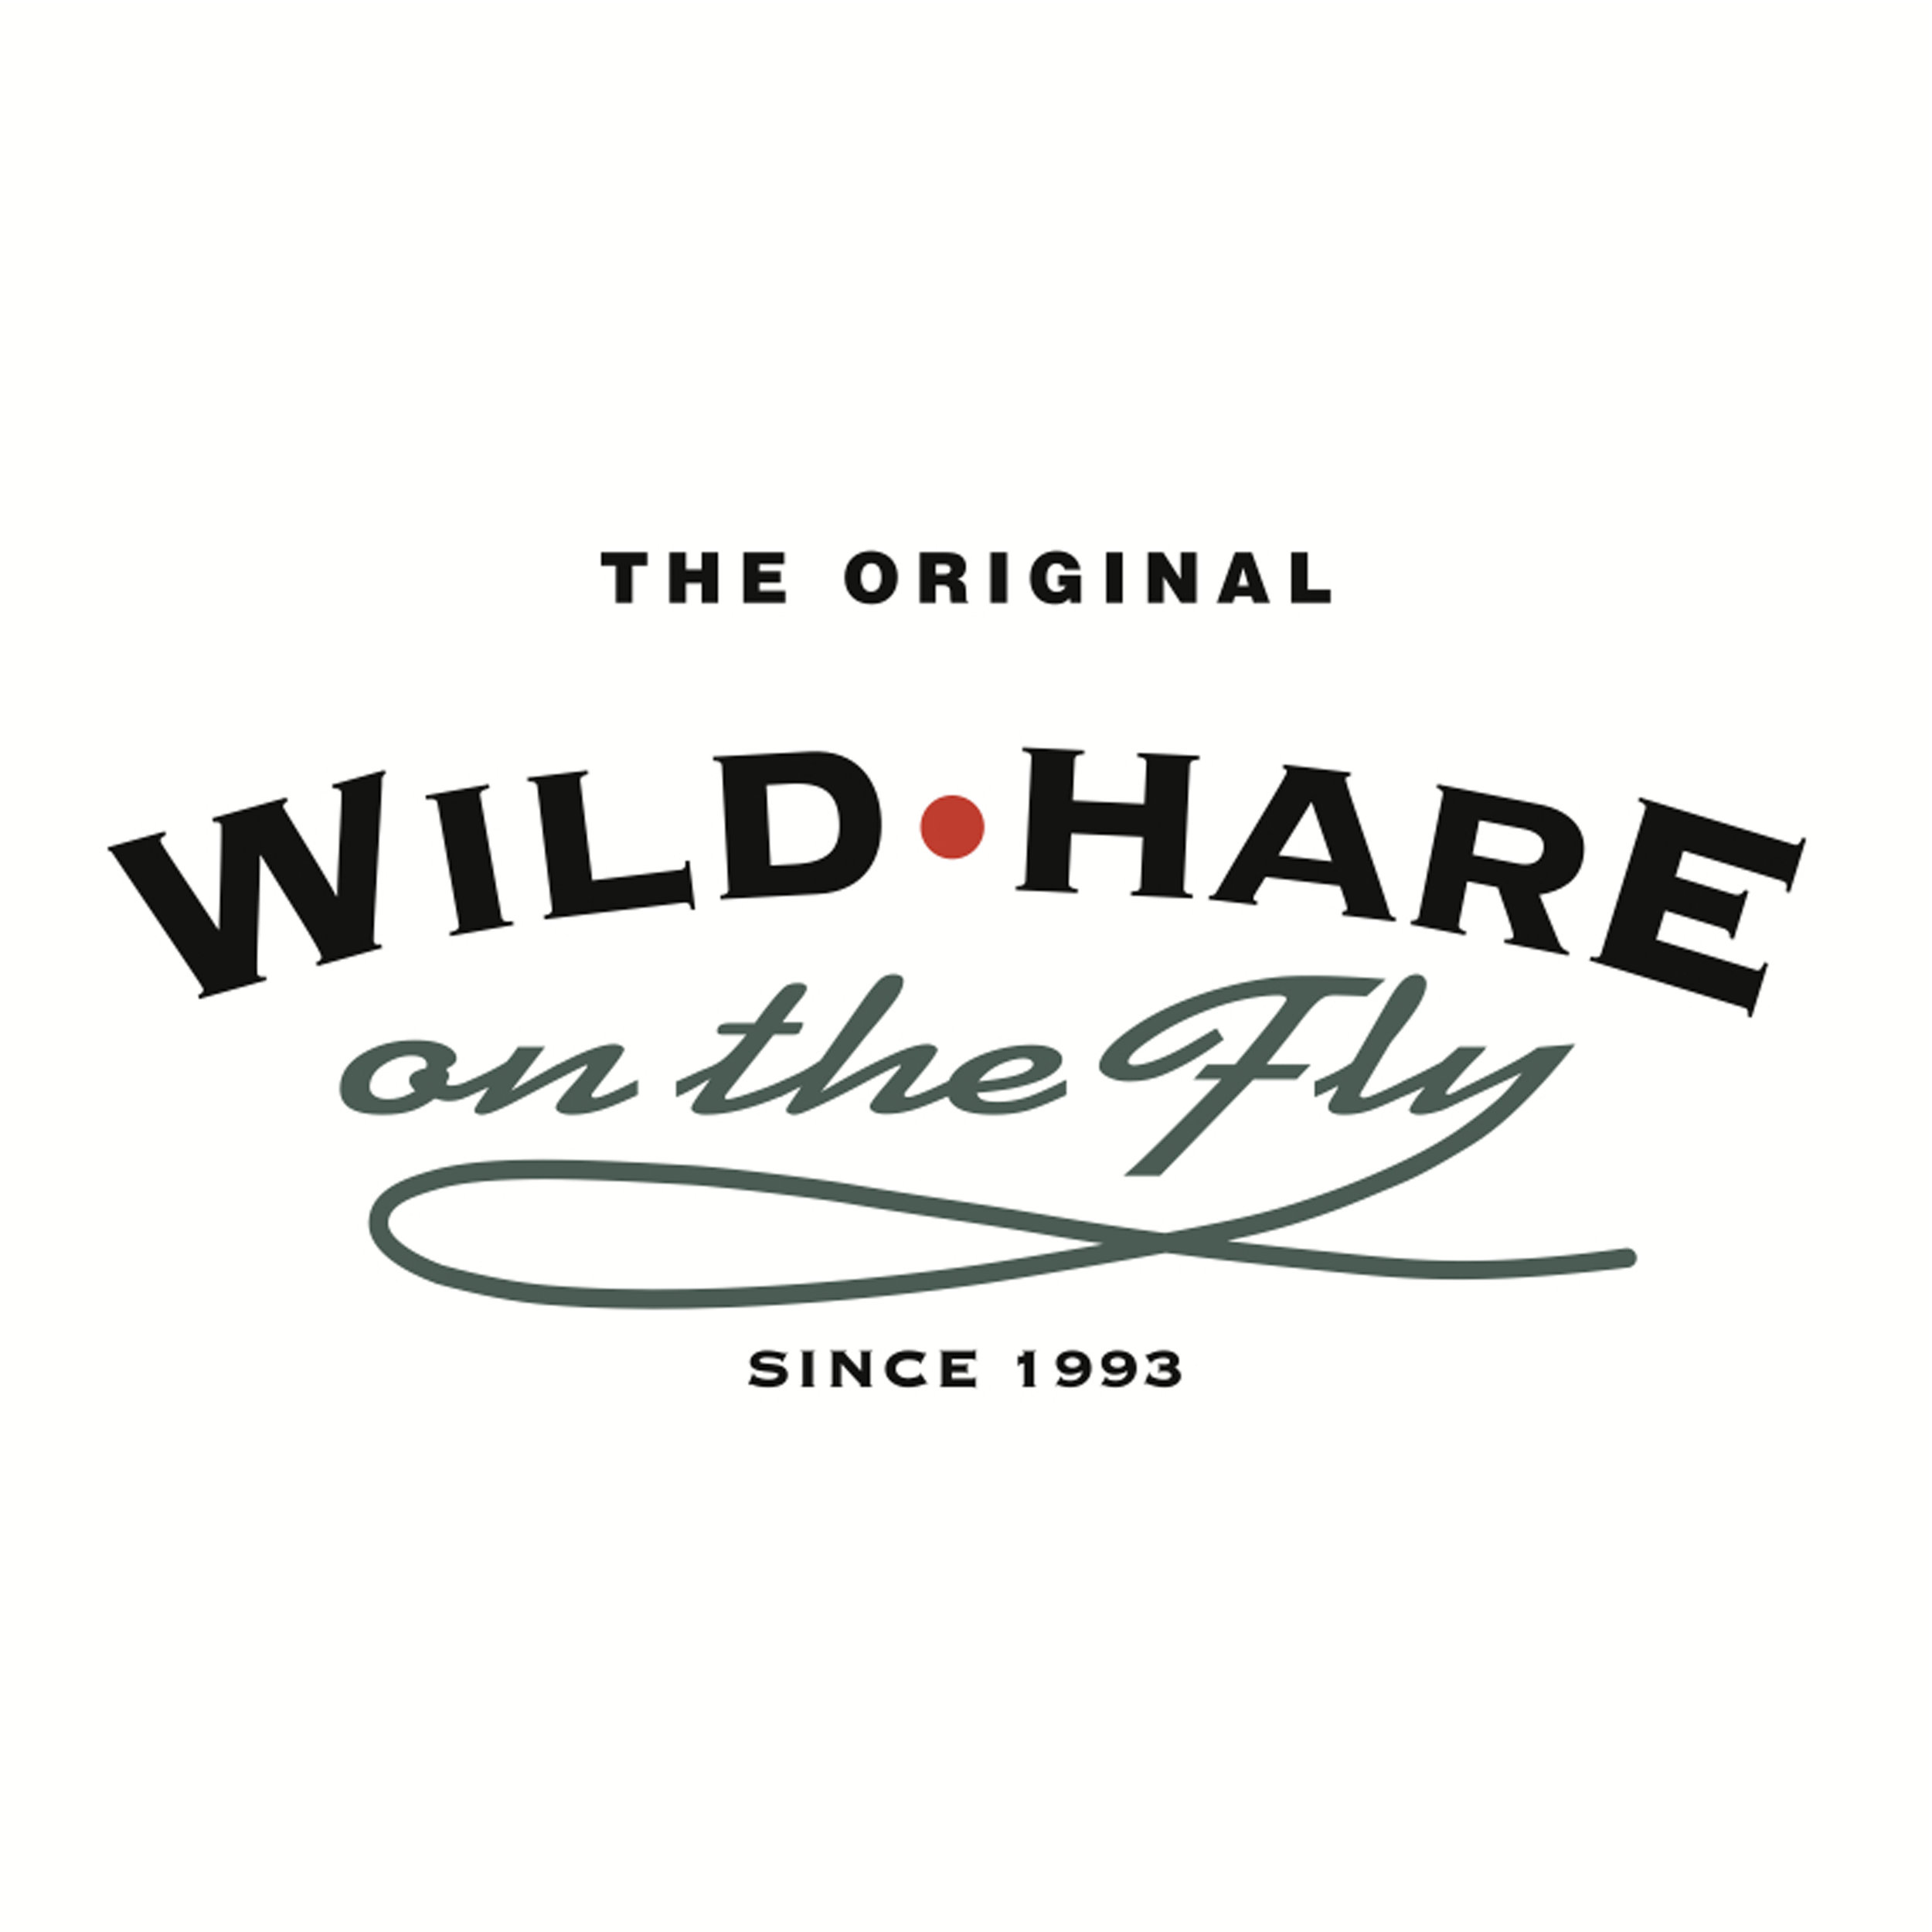  Wild•Hare On the Fly logo  Design, branding and creative direction by Chuck Mitchell 